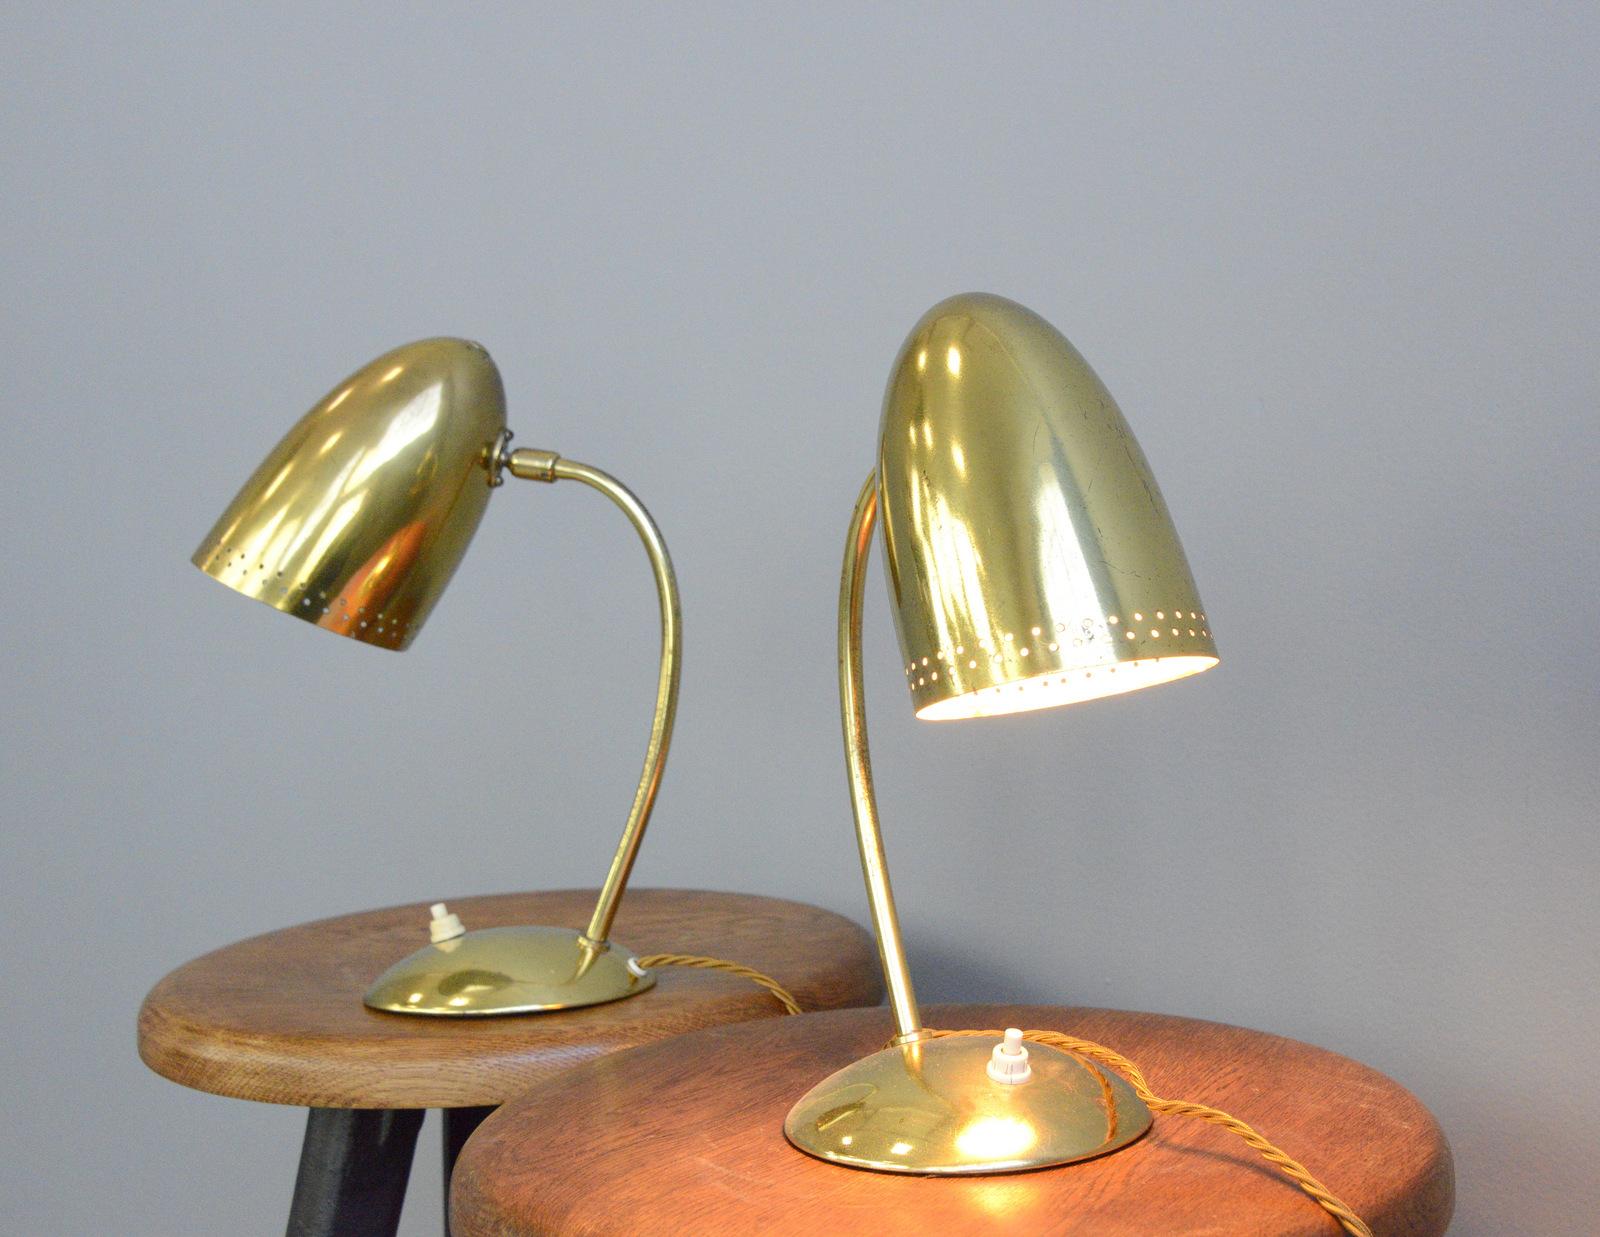 Bauhaus Model 4007 Table Lamps by Christian Dell for Kaiser Idell, circa 1930s